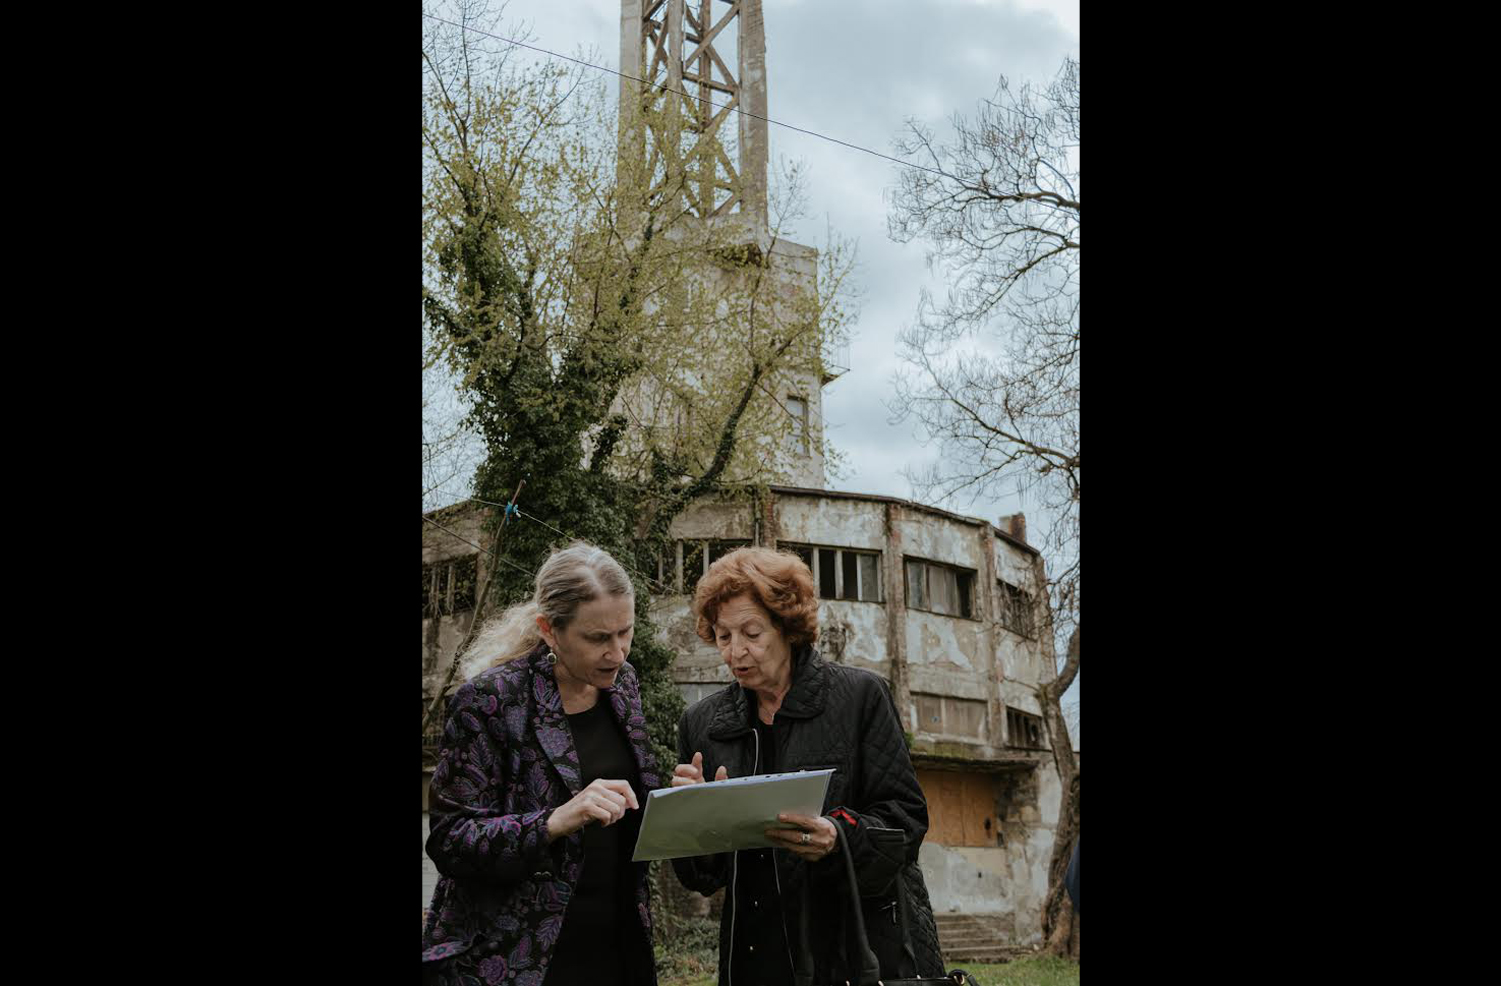 Belgrade, Serbia, July 2022: At the site of the Staro Sajmiste concentration camp, Ellen Germain (at left) talks to the director (at right) about the plans to create a memorial and museum at the site. (Photo provided by Ellen Germain)